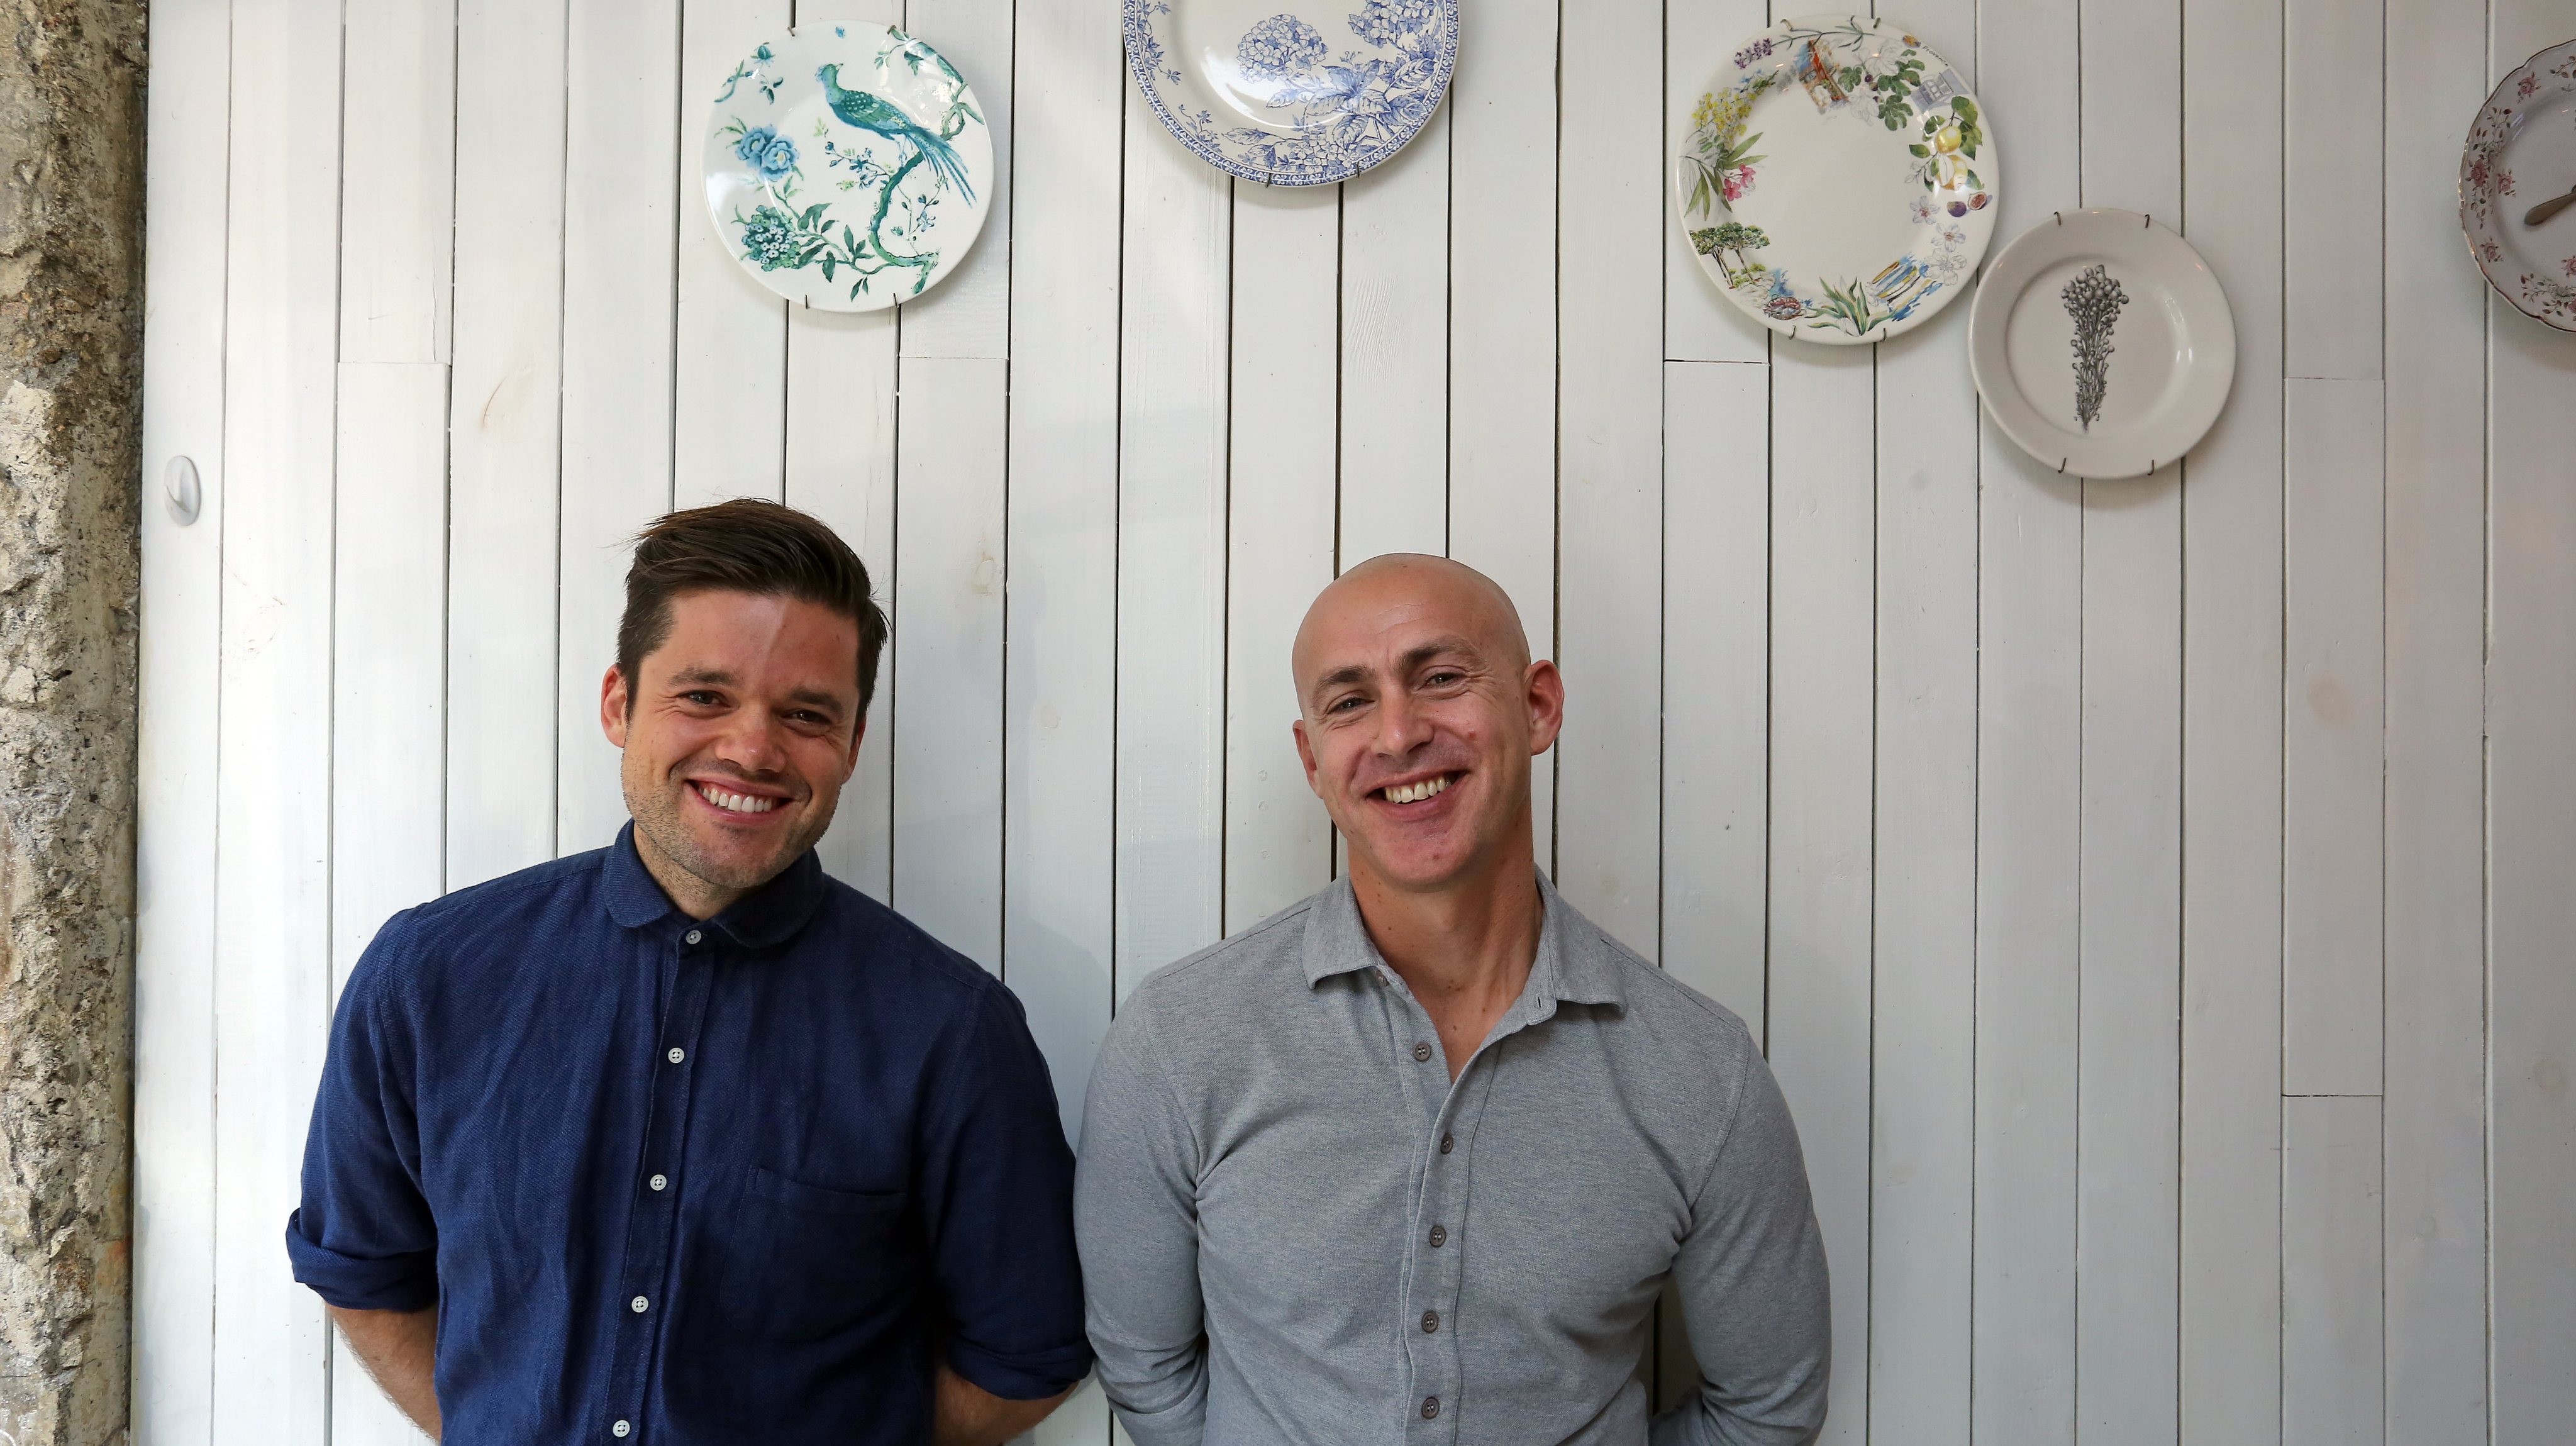 (L ro R) Rich Pierson and Andy Puddicombe, founders of mobile meditation app Headspace, poses for a photograph in Sheung Wan. 16APR15 [2015 FEATURES HEALTH]